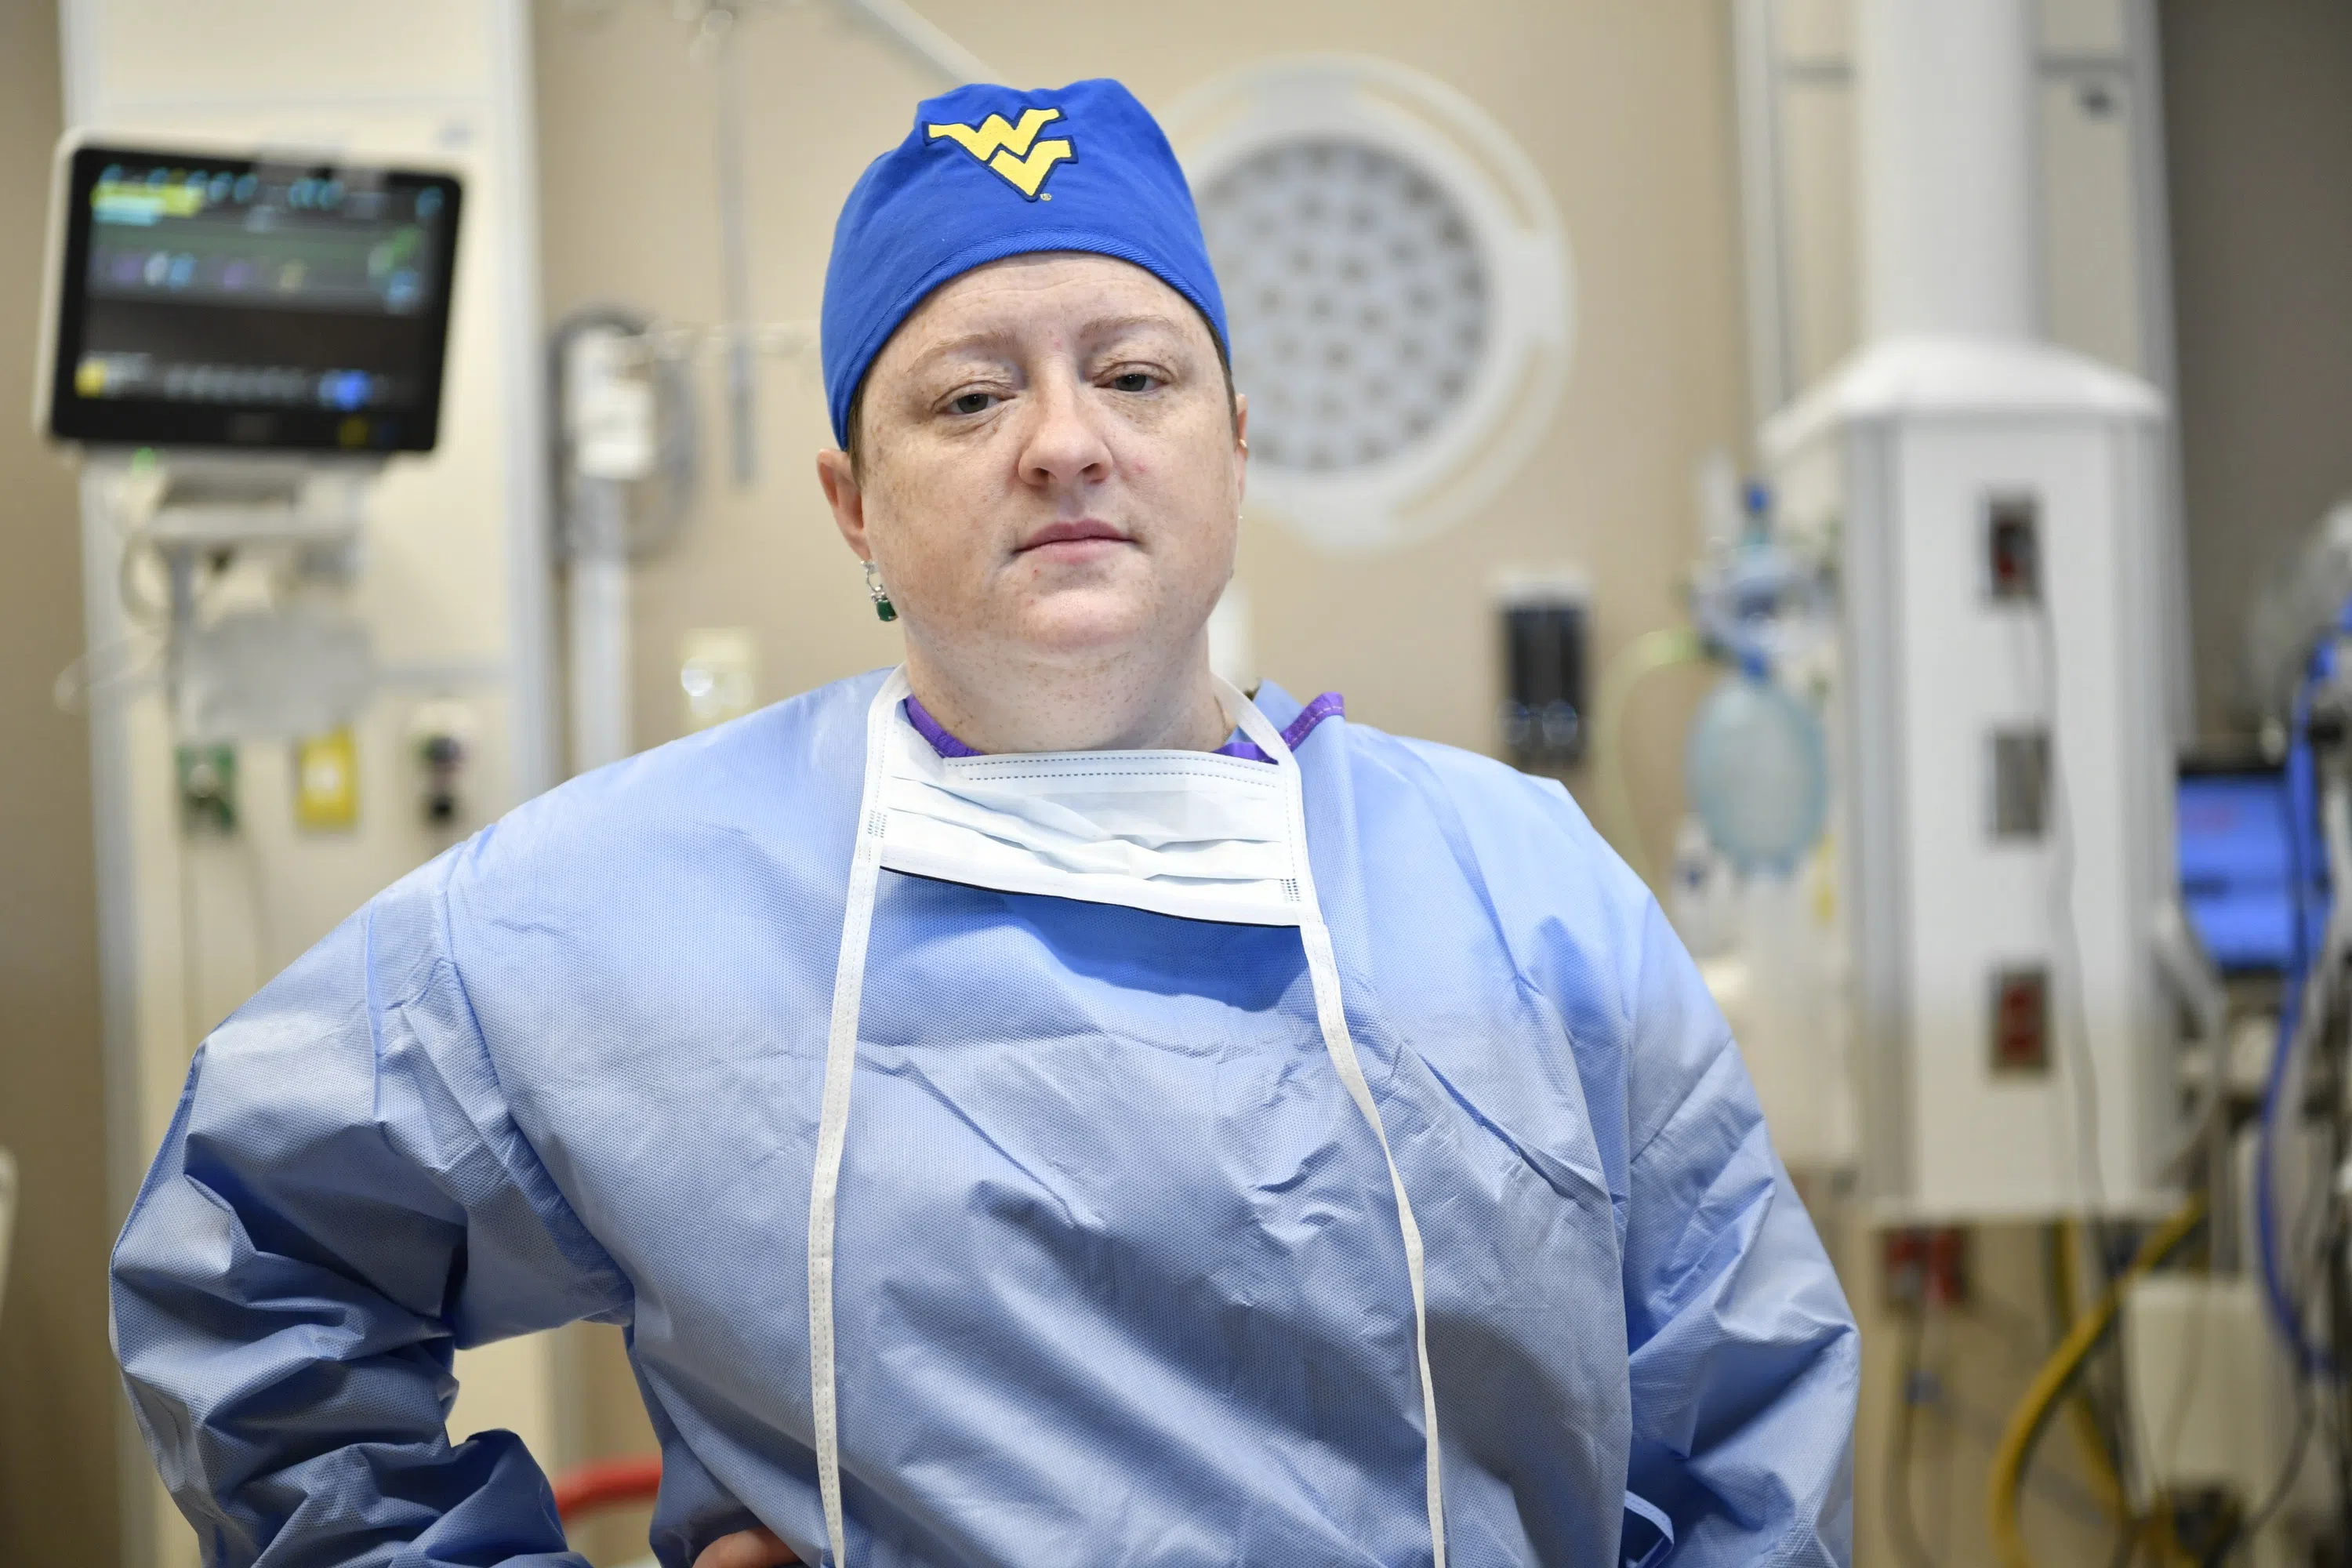 A nurse in scrubs and a flying WV headband looks into the camera.